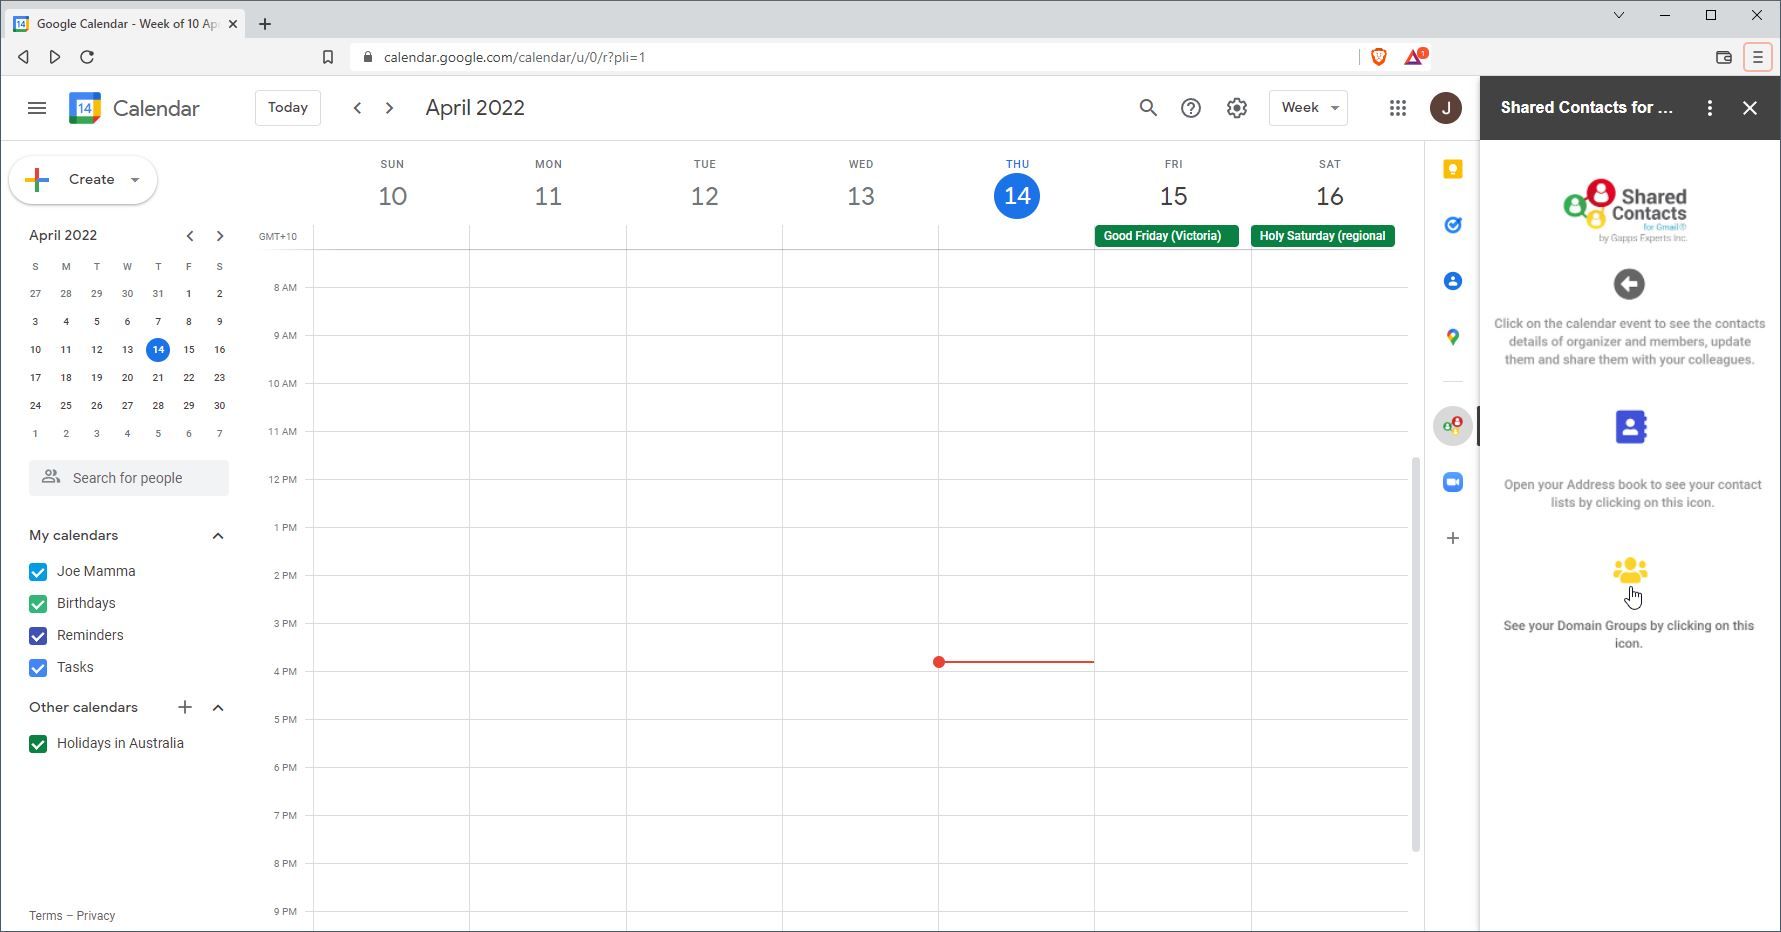 A Screenshot of Shared Contacts for Google Calendar in Use